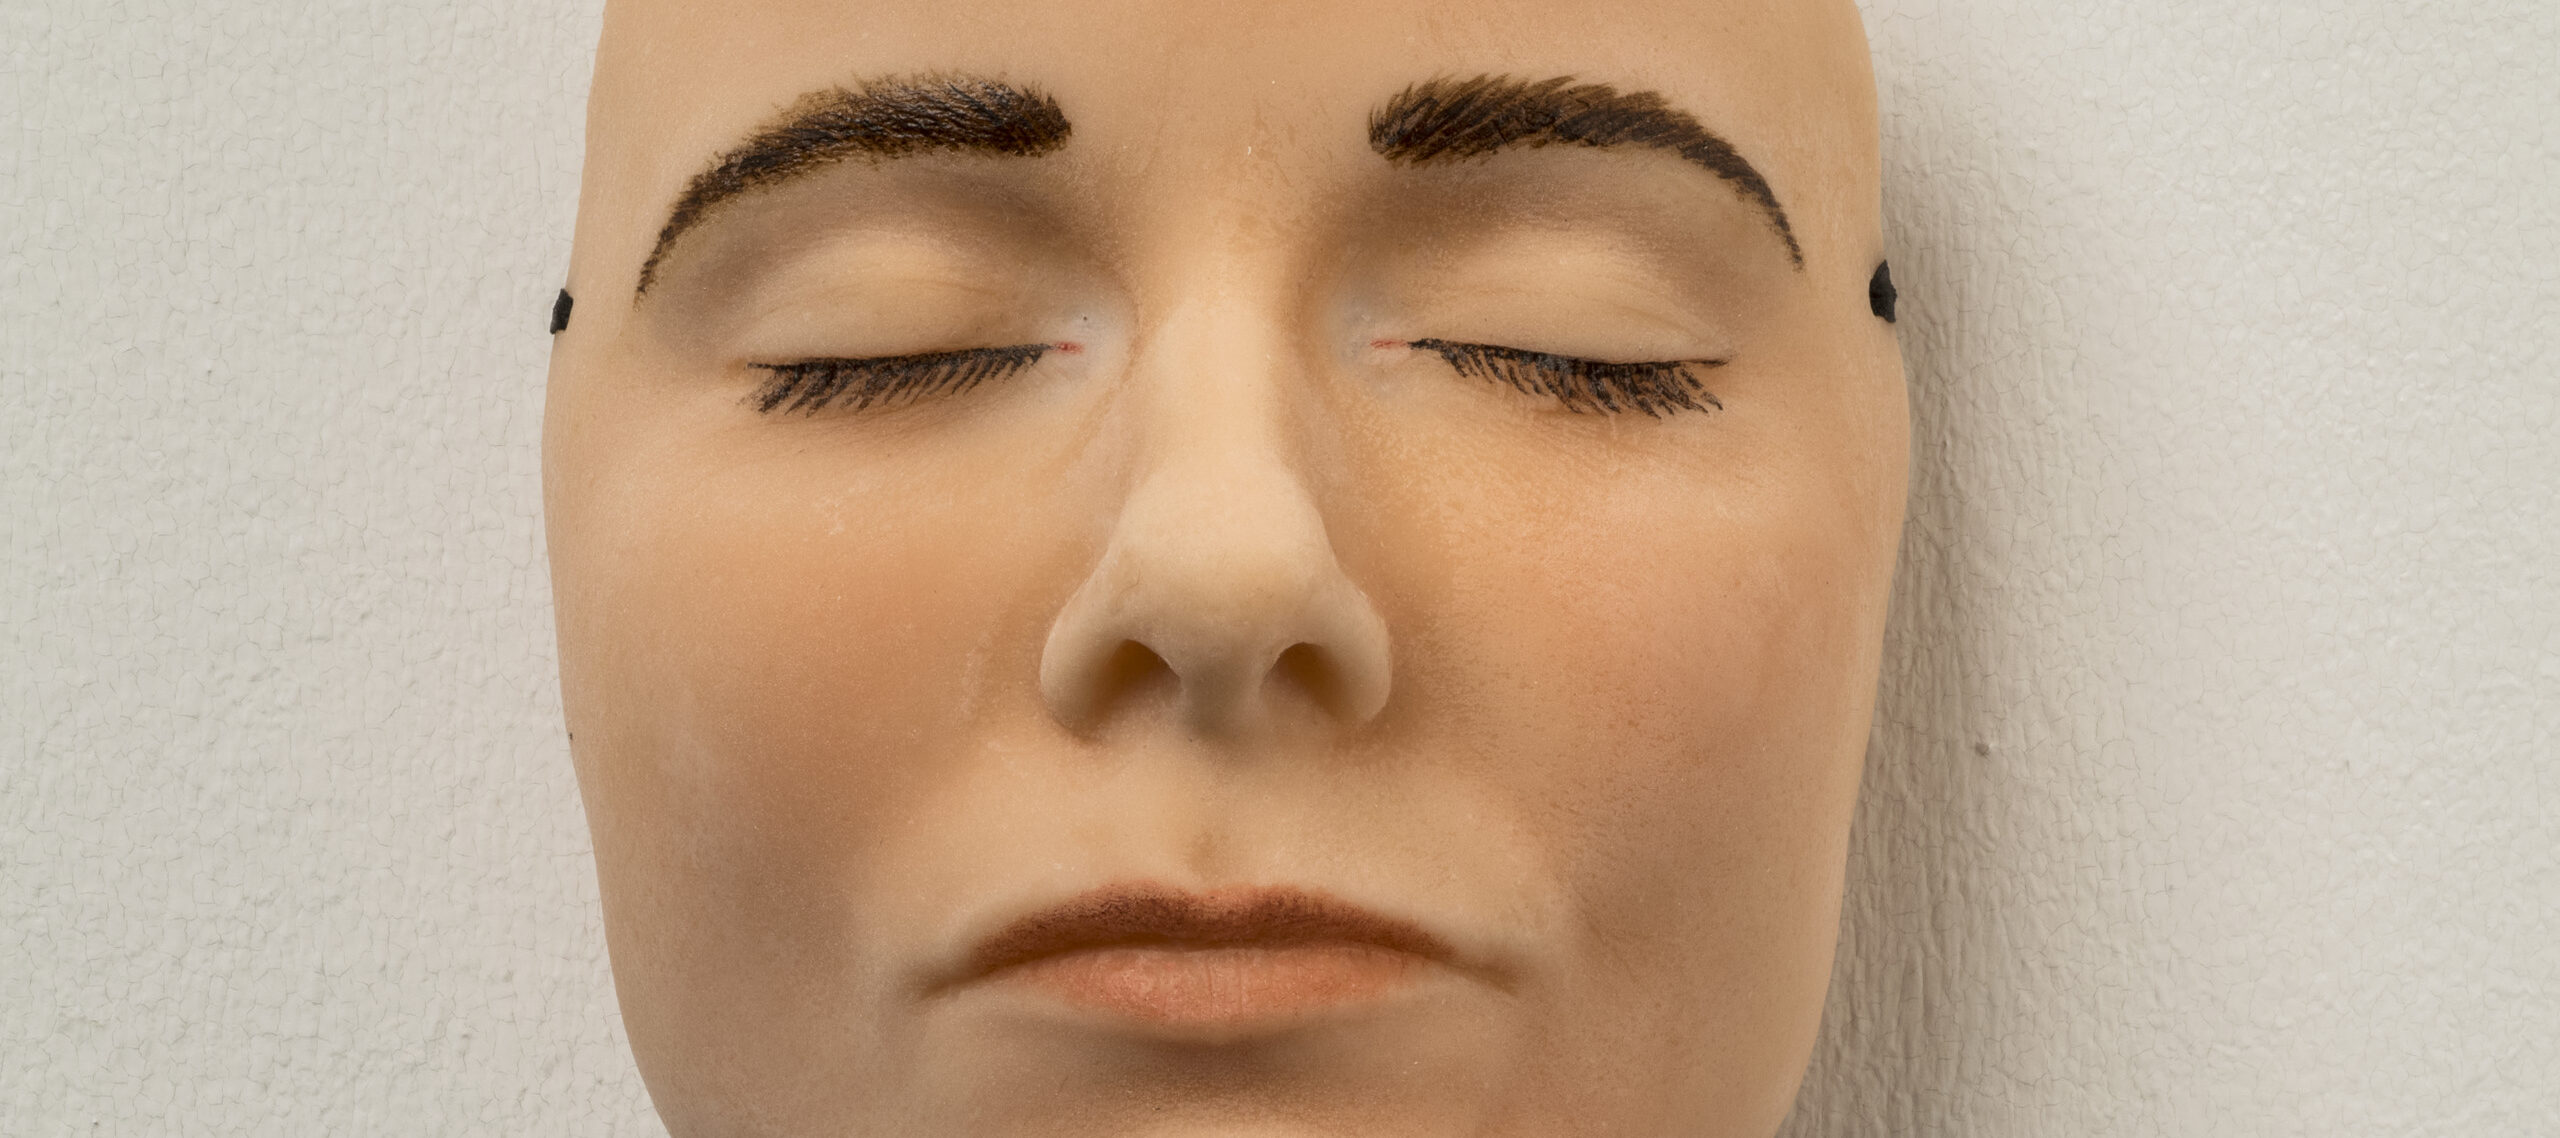 A highly realistic mask of a light-skinned face with dark brown eyebrows and eyelashes that appears to be sleeping—its eyes and mouth are closed and relaxed. The mask hangs on a white wall.